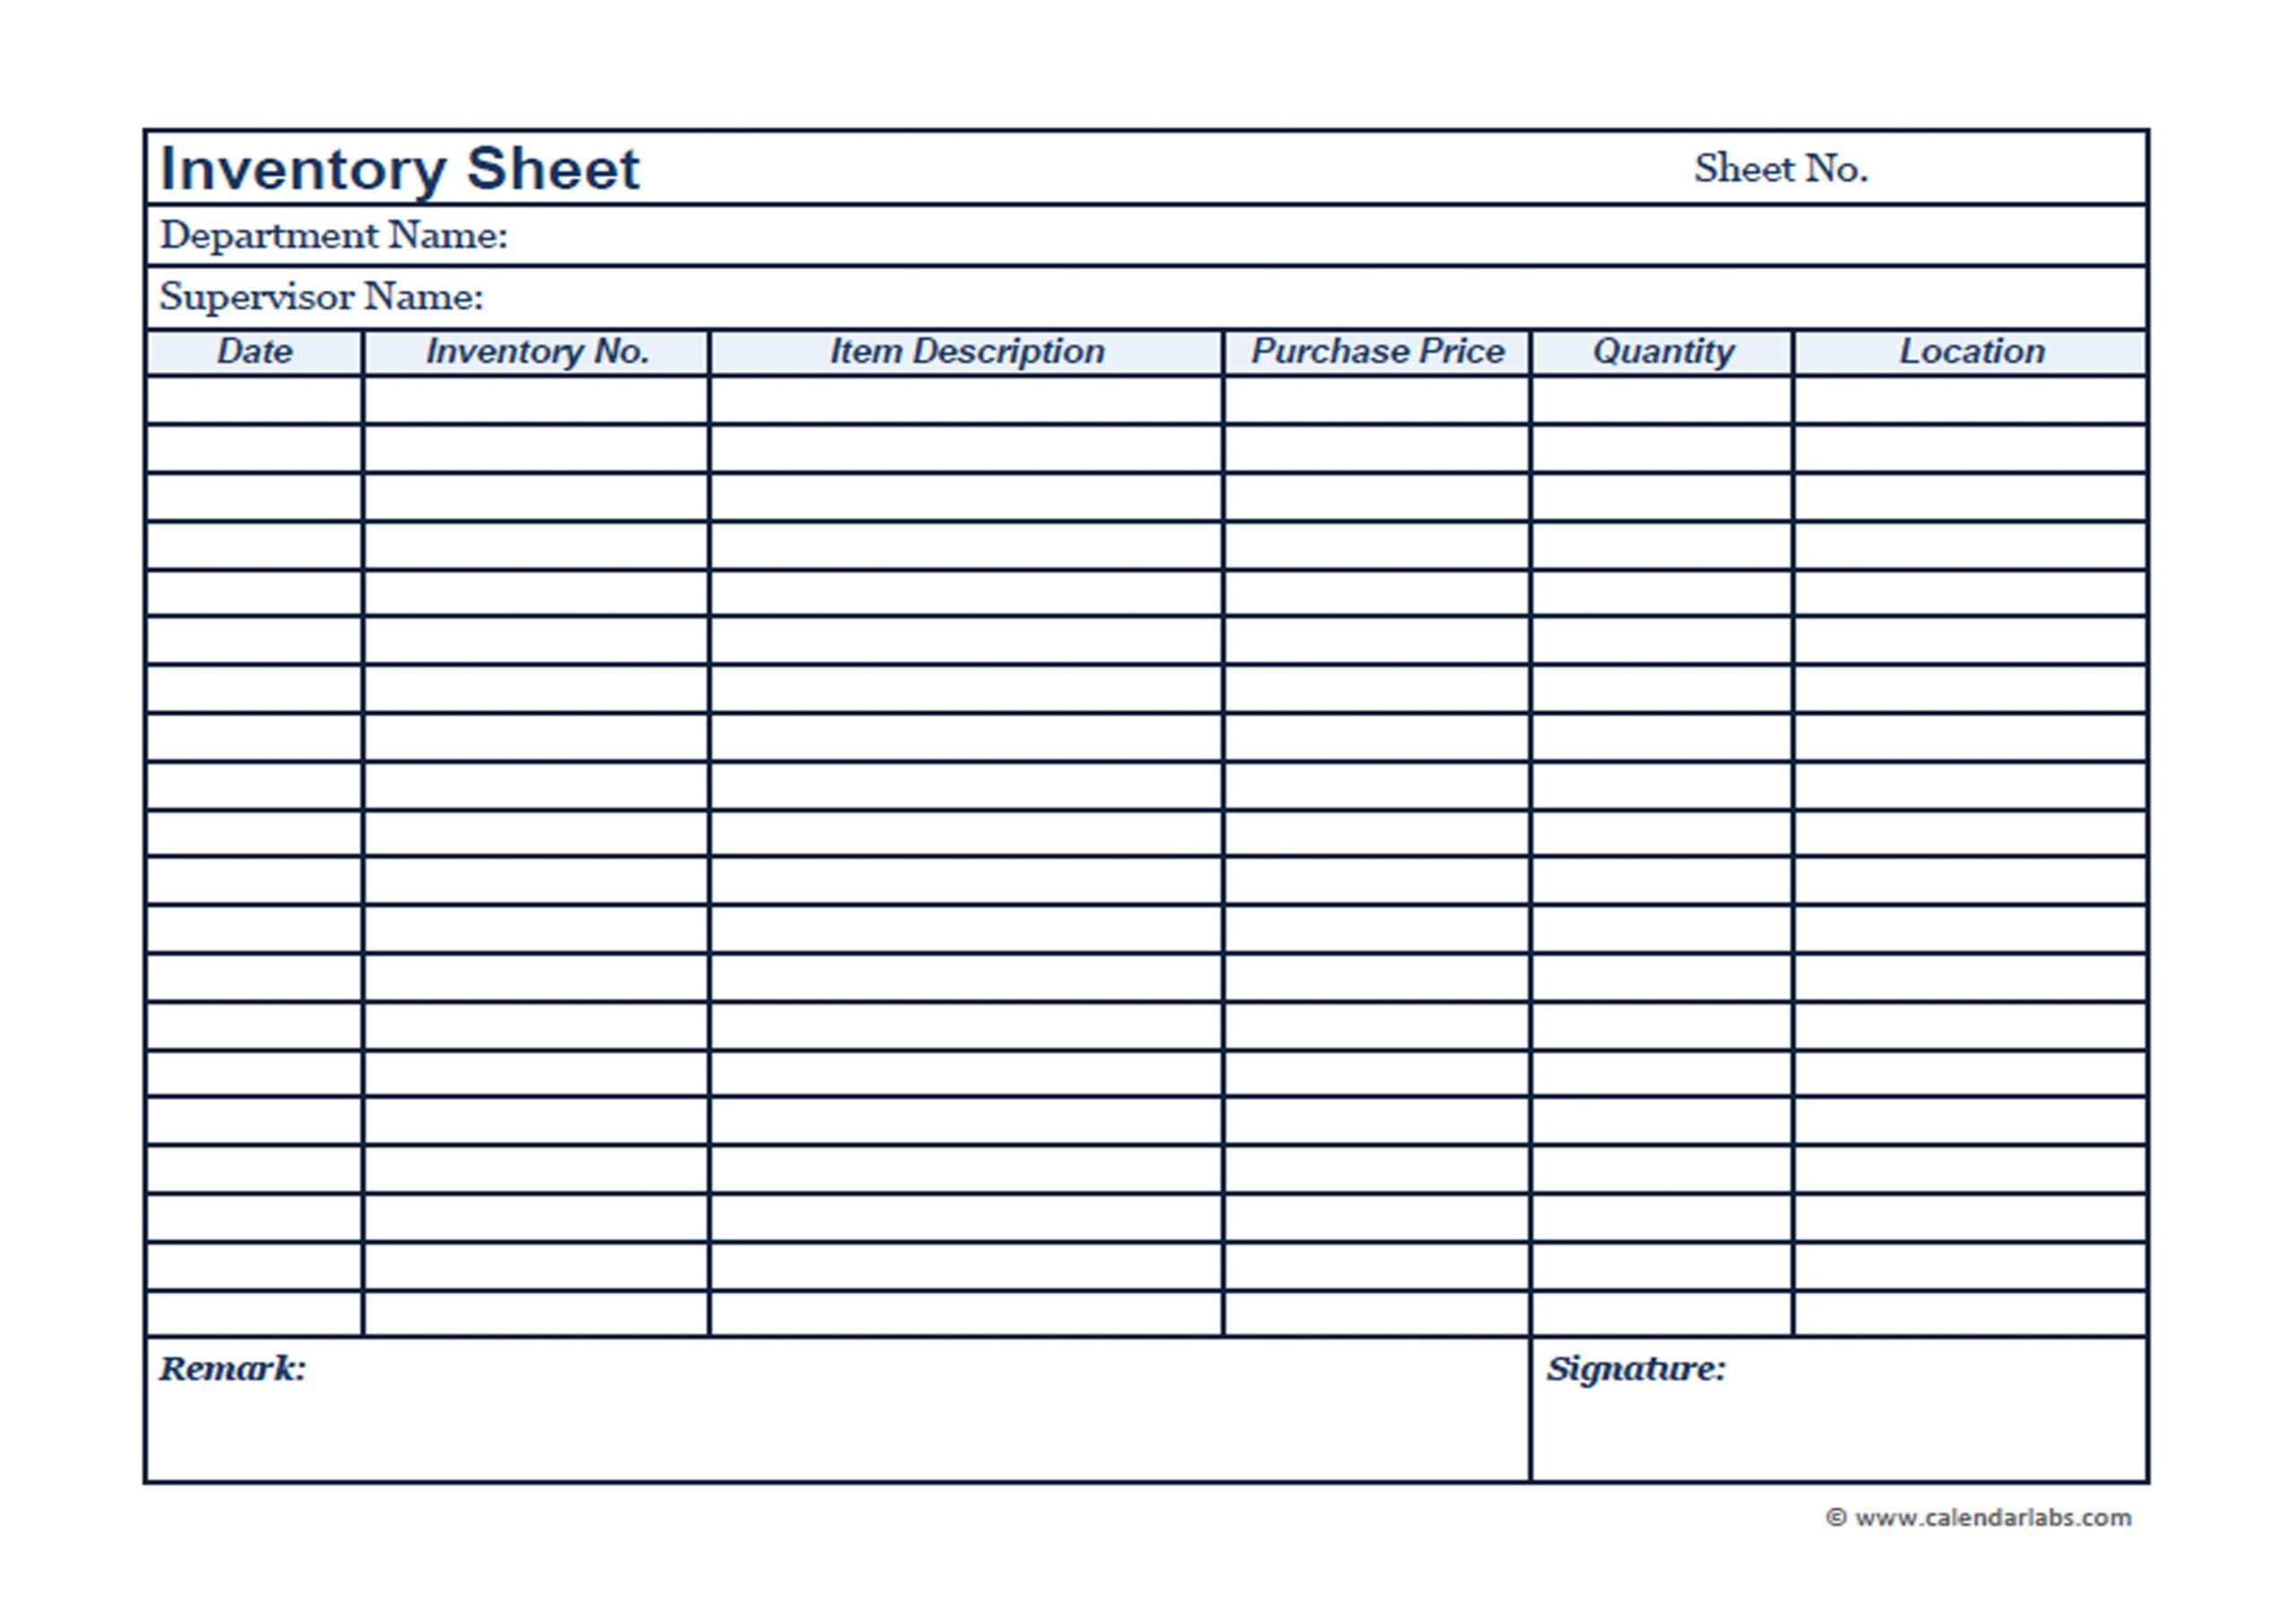 Business Inventory Template - Free Printable Templates inside Business Directory Template Free